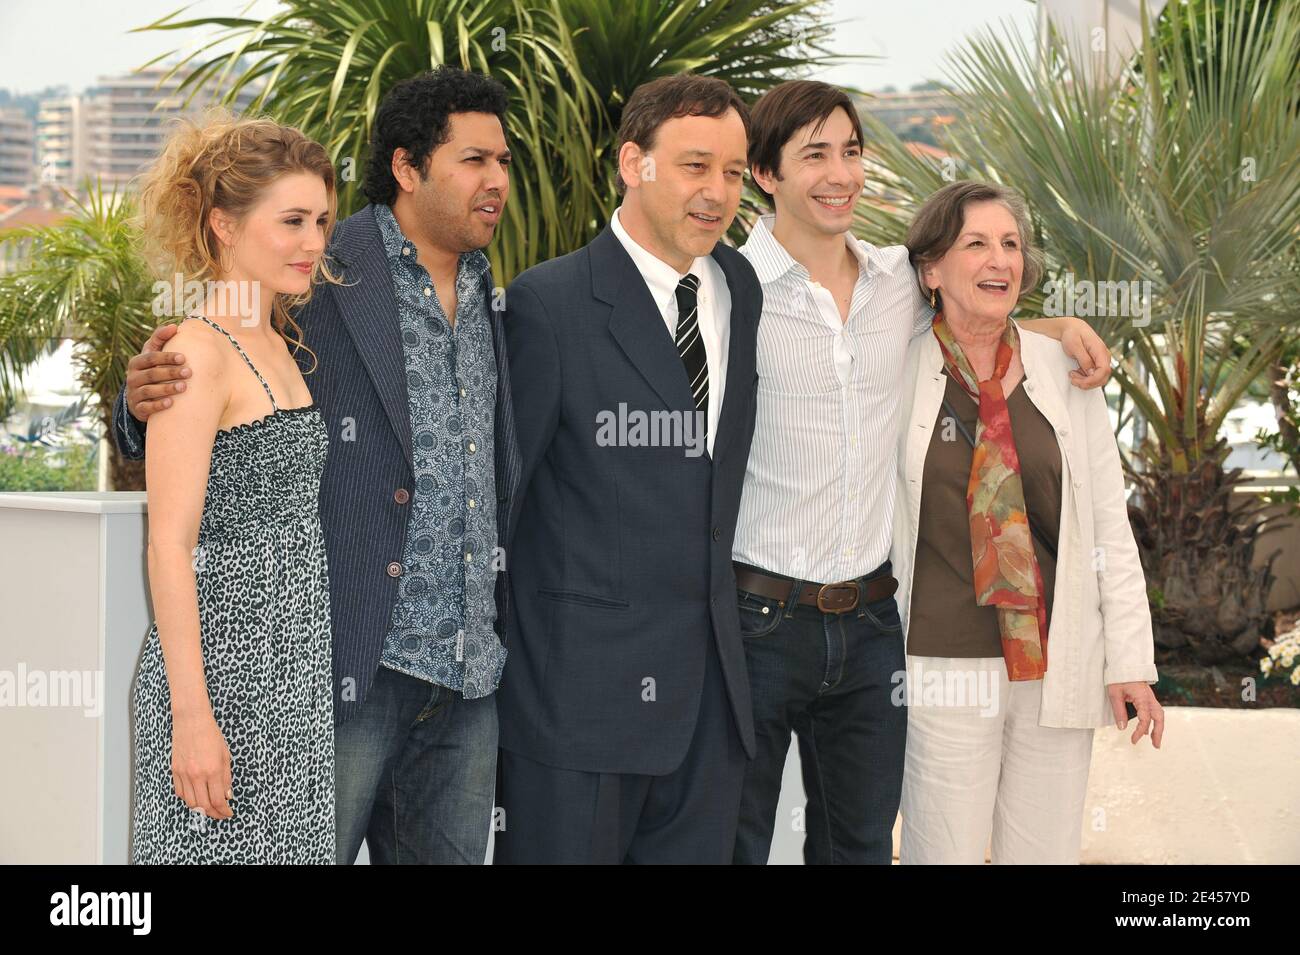 (L-R) Alison Lohman, Dileep Rao, Sam Raimi, Justin Long and Lorna Raver attend the photocall for the film 'Drag Me To Hell at the Palais des Festival during 62nd International Cannes Film Festival in Cannes, France on May 21, 2009. Photo by Nebinger-Orban/ABACAPRESS.COM Stock Photo